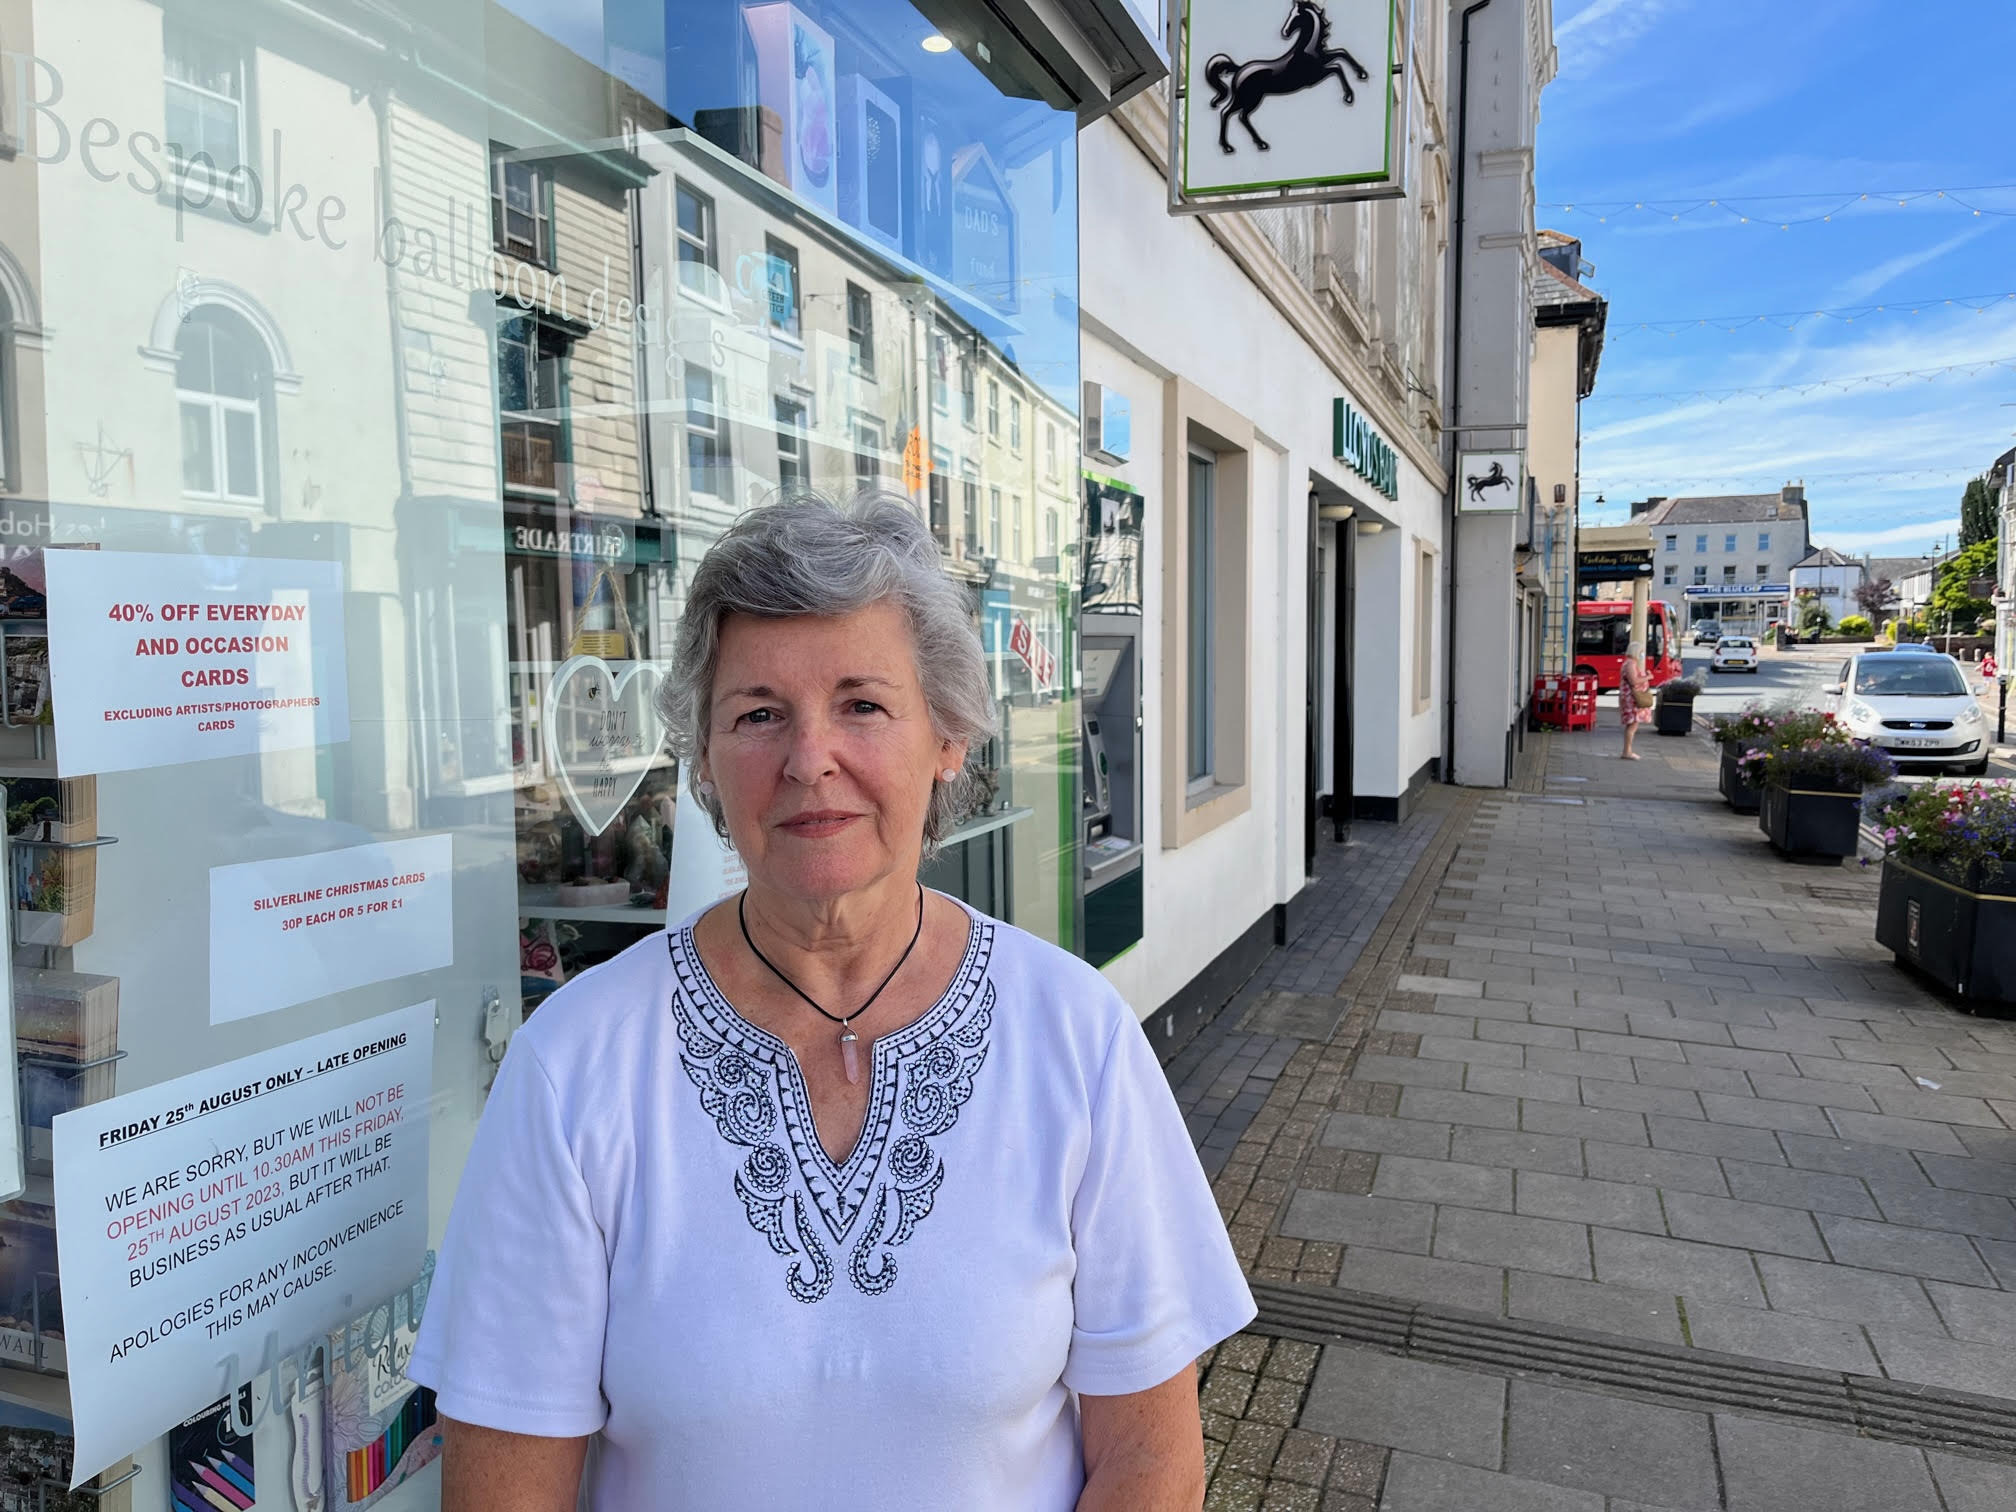 Tricia Stephenson outside her Victoria Eyton shop, which she is closing in September as a direct result of the car parking increases. Lloyds Bank, next door, is also closing (Pic: Lee Trewhela / LDRS)